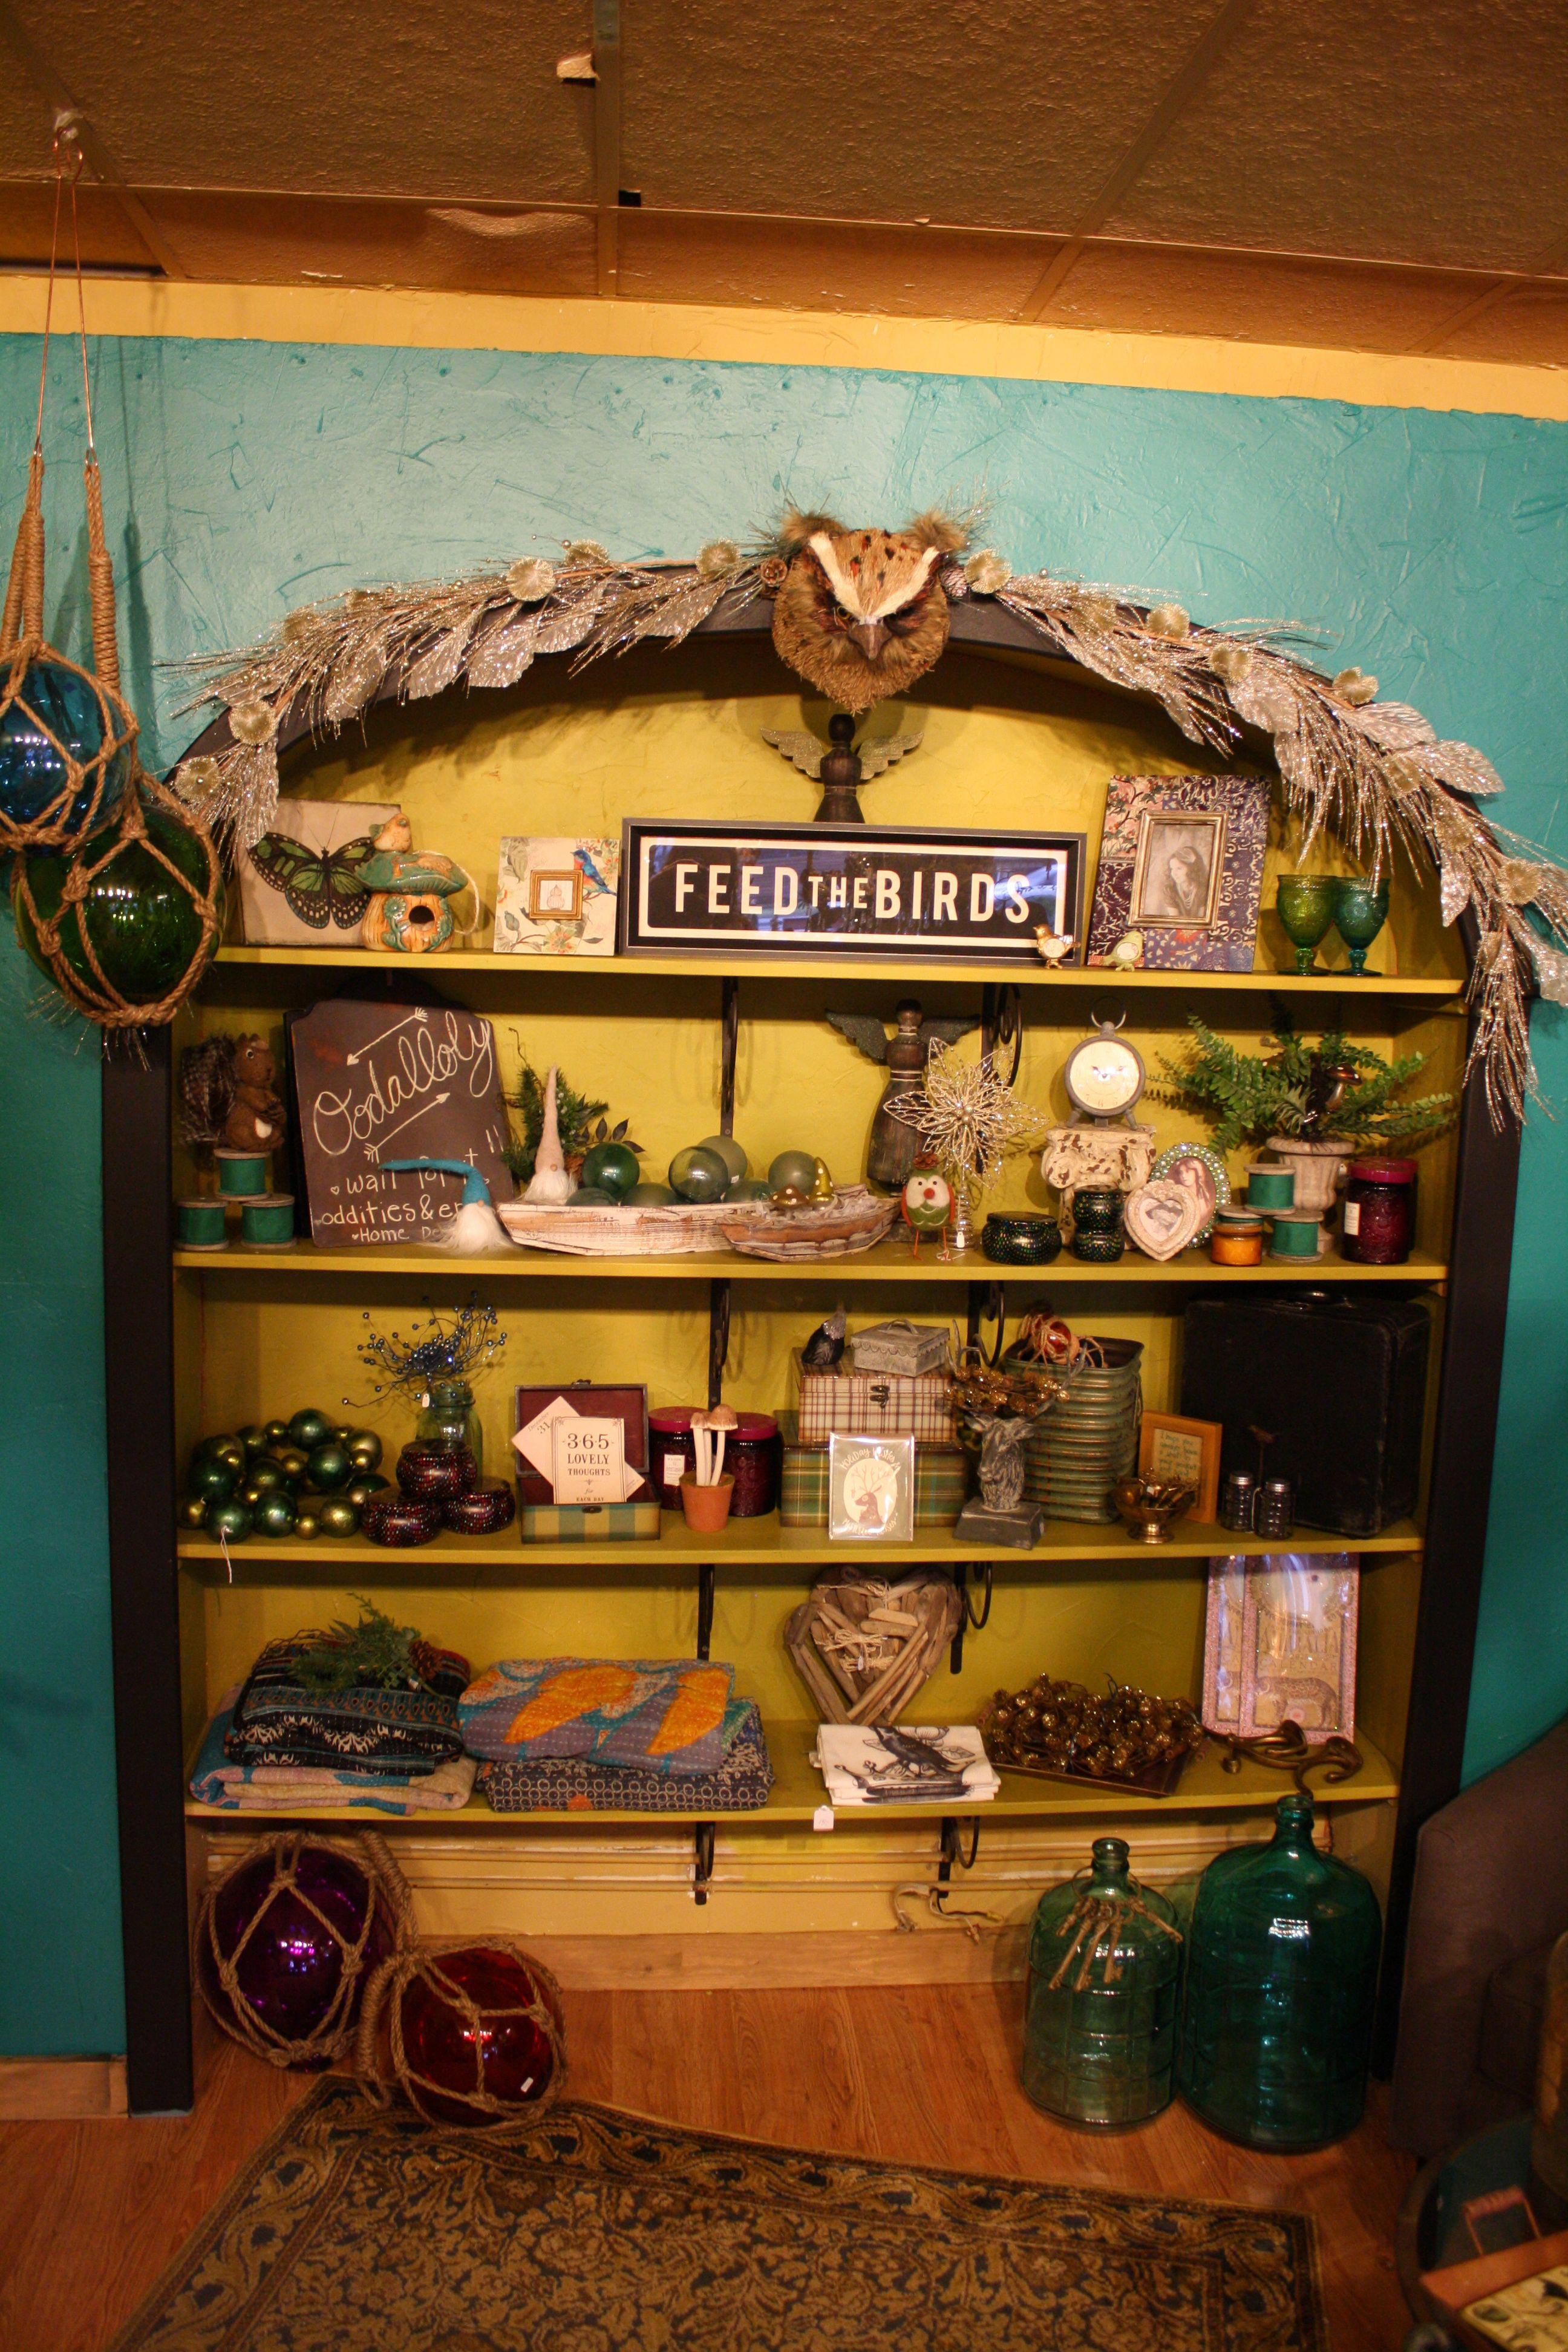 Some of the unique items for sale at Oodalolly are showcased.-Photo by Lindsay Olsen